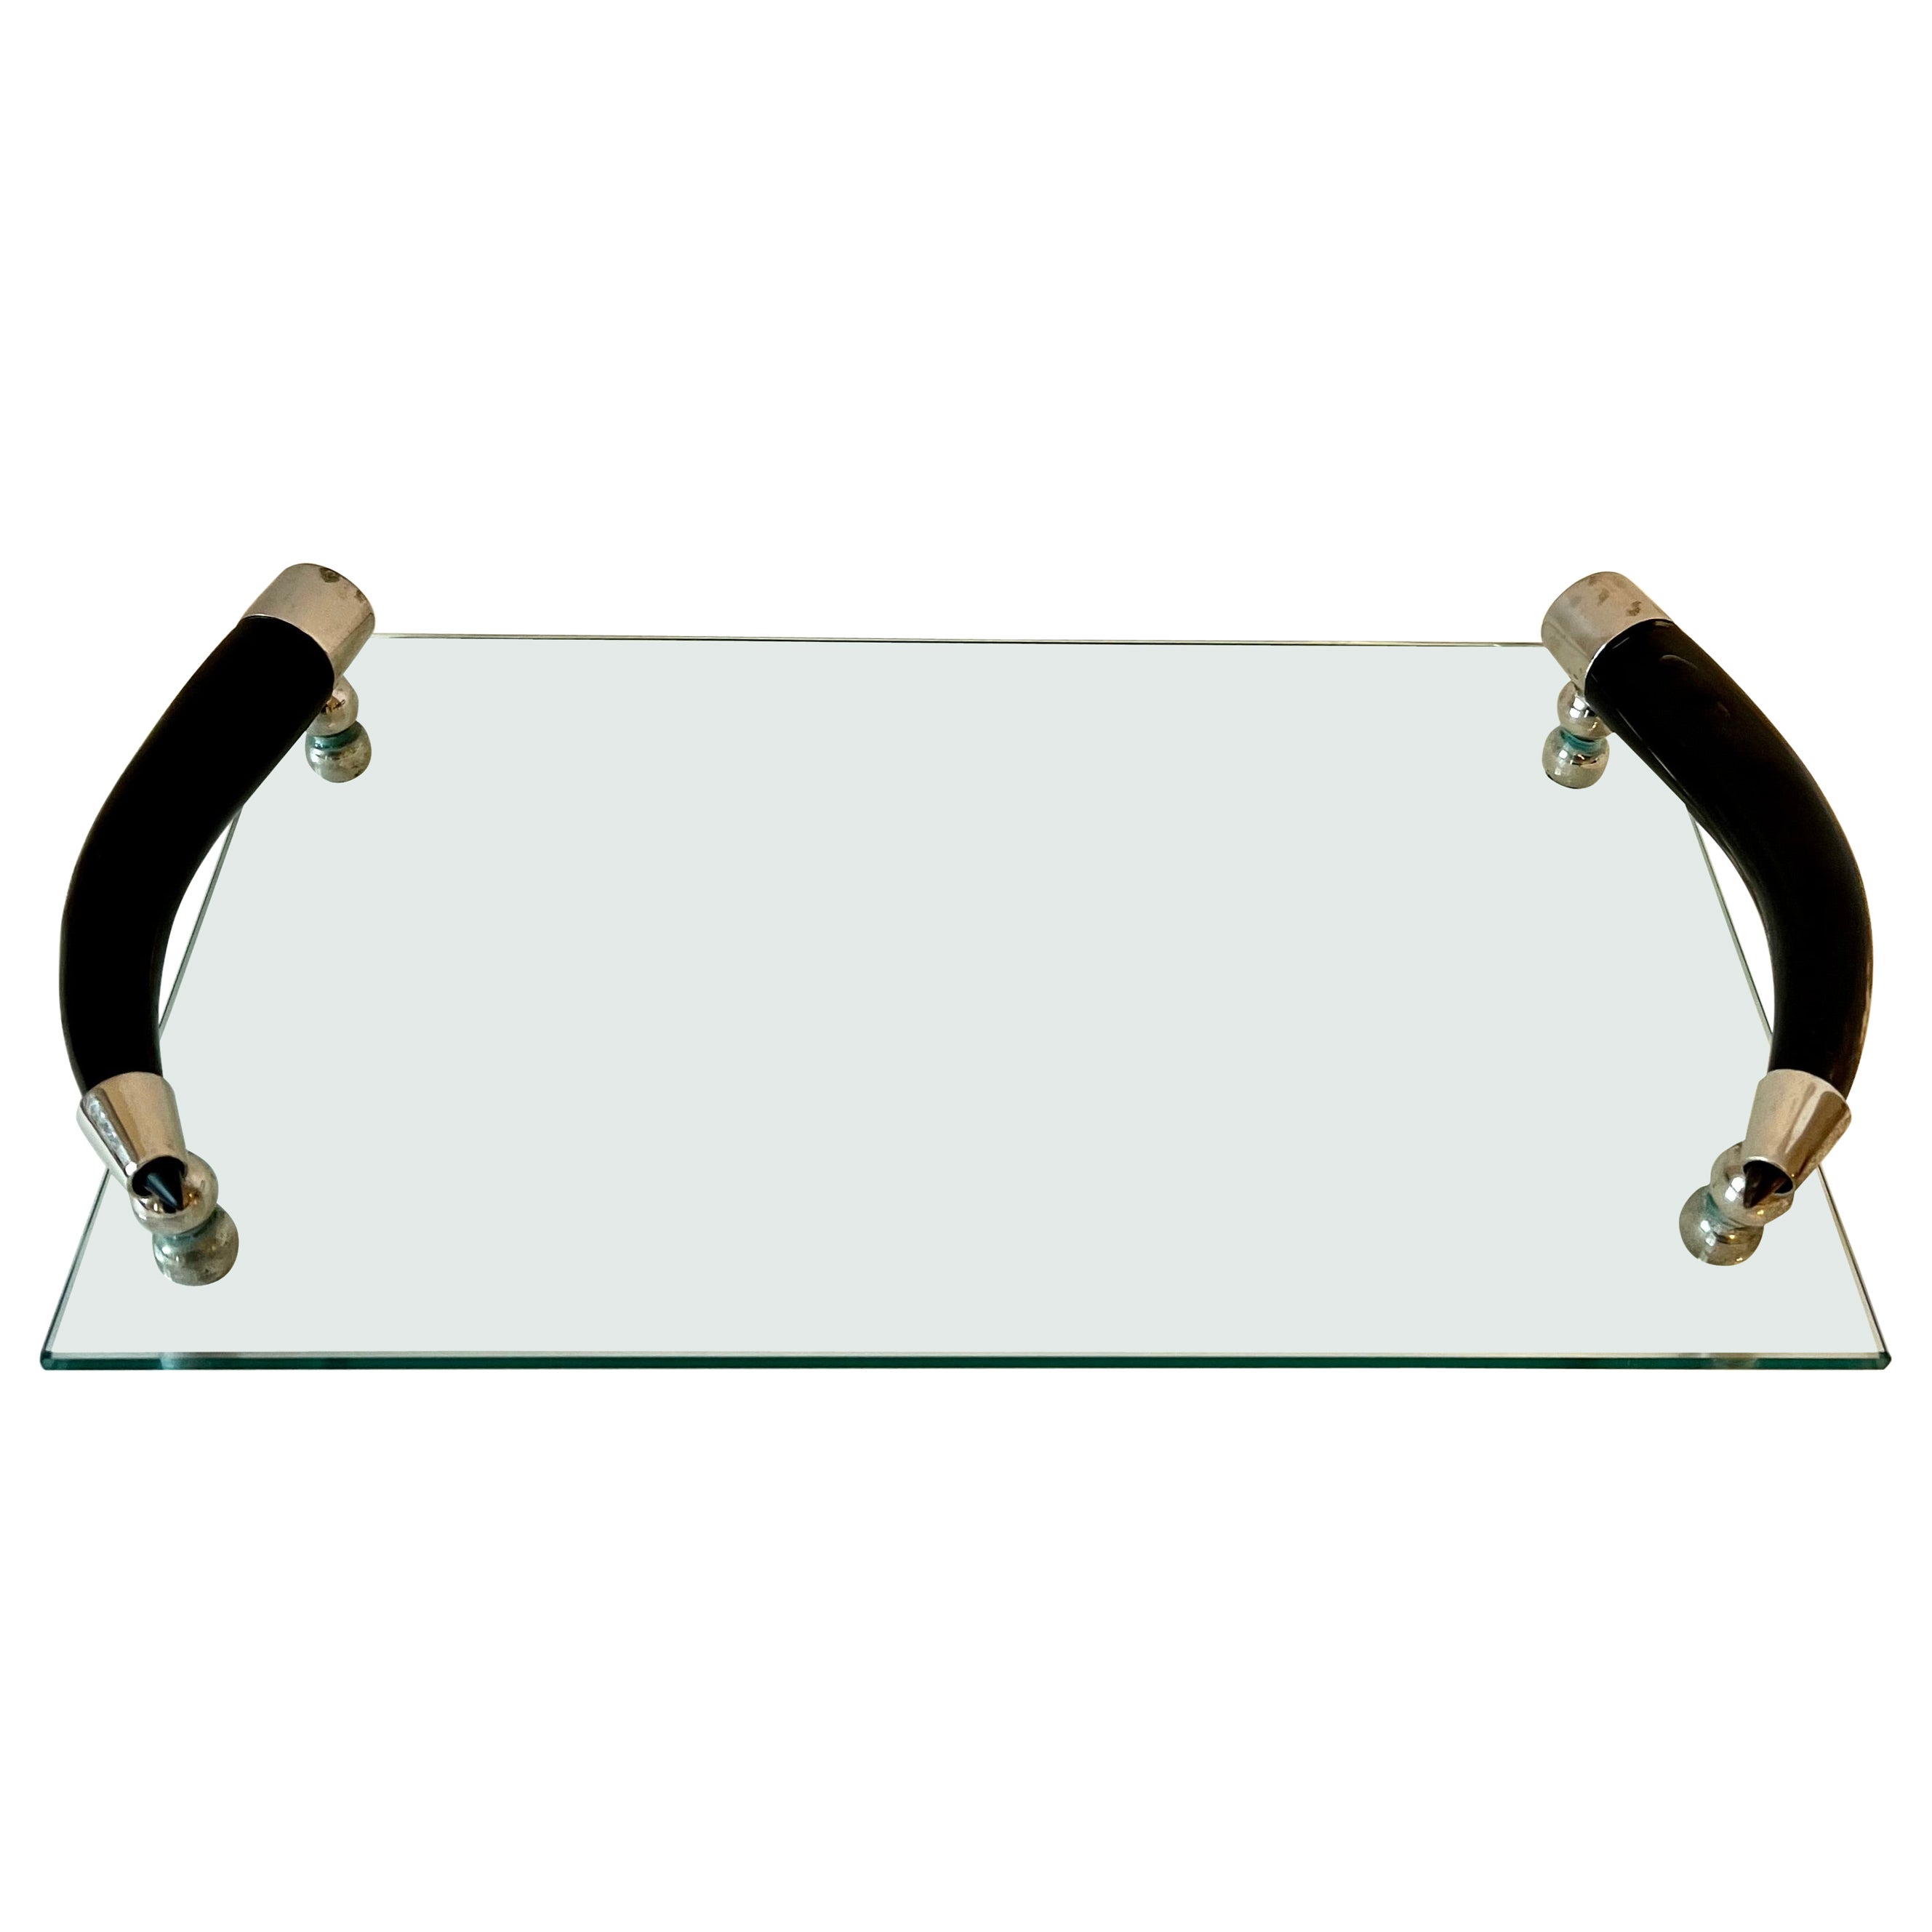 Rectangular Glass Tray with Bone Handles with Silver Plate Fittings and Feet